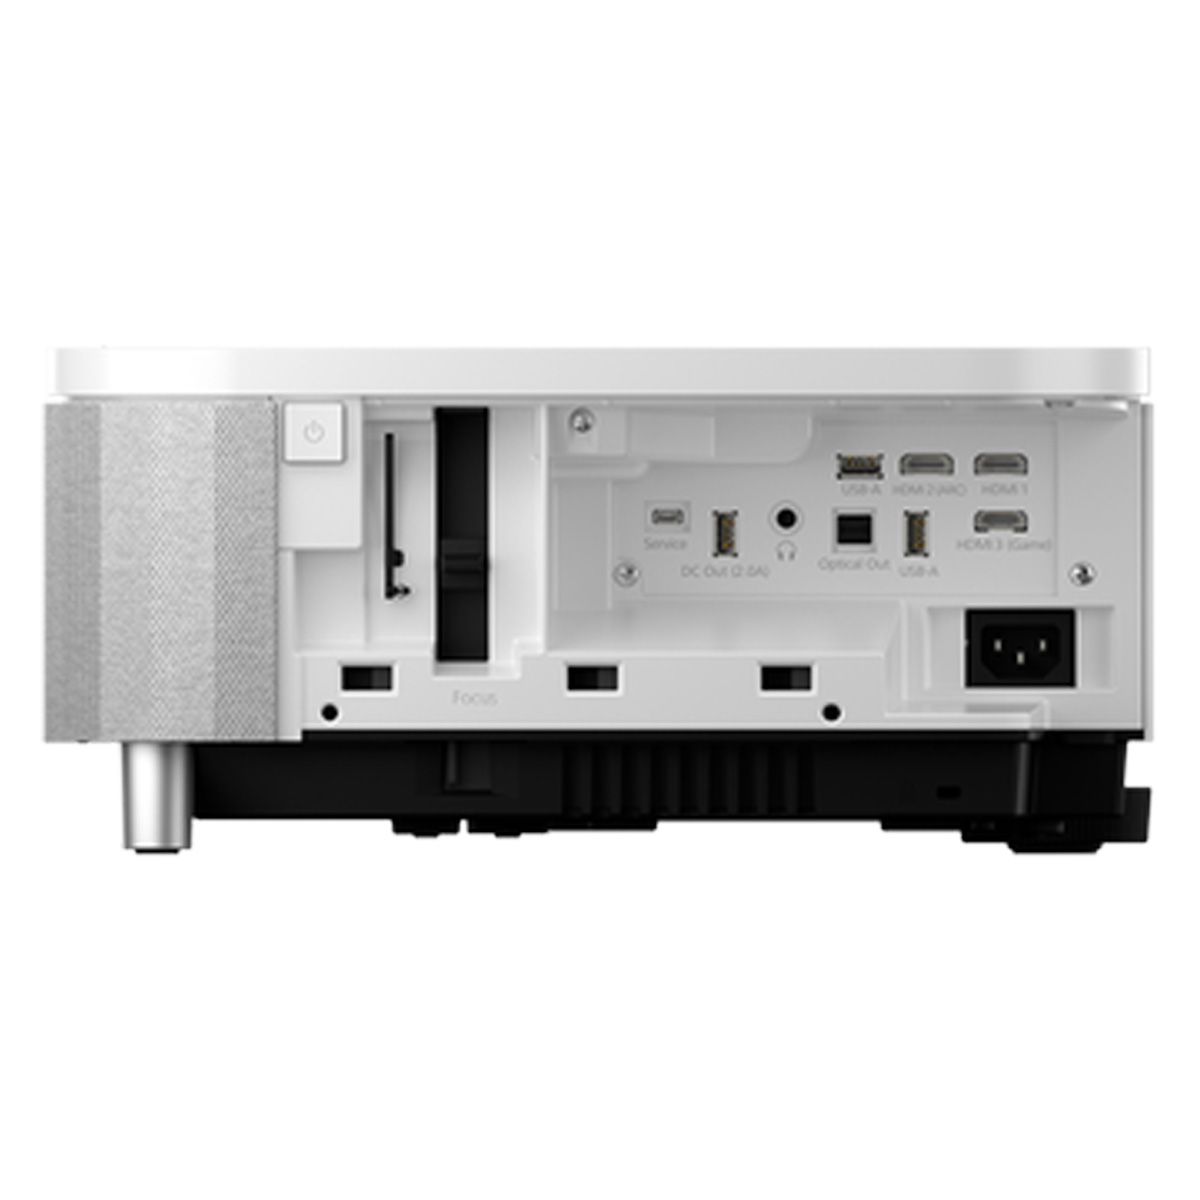 Epson LS800 UST Projector - White - side view of inputs